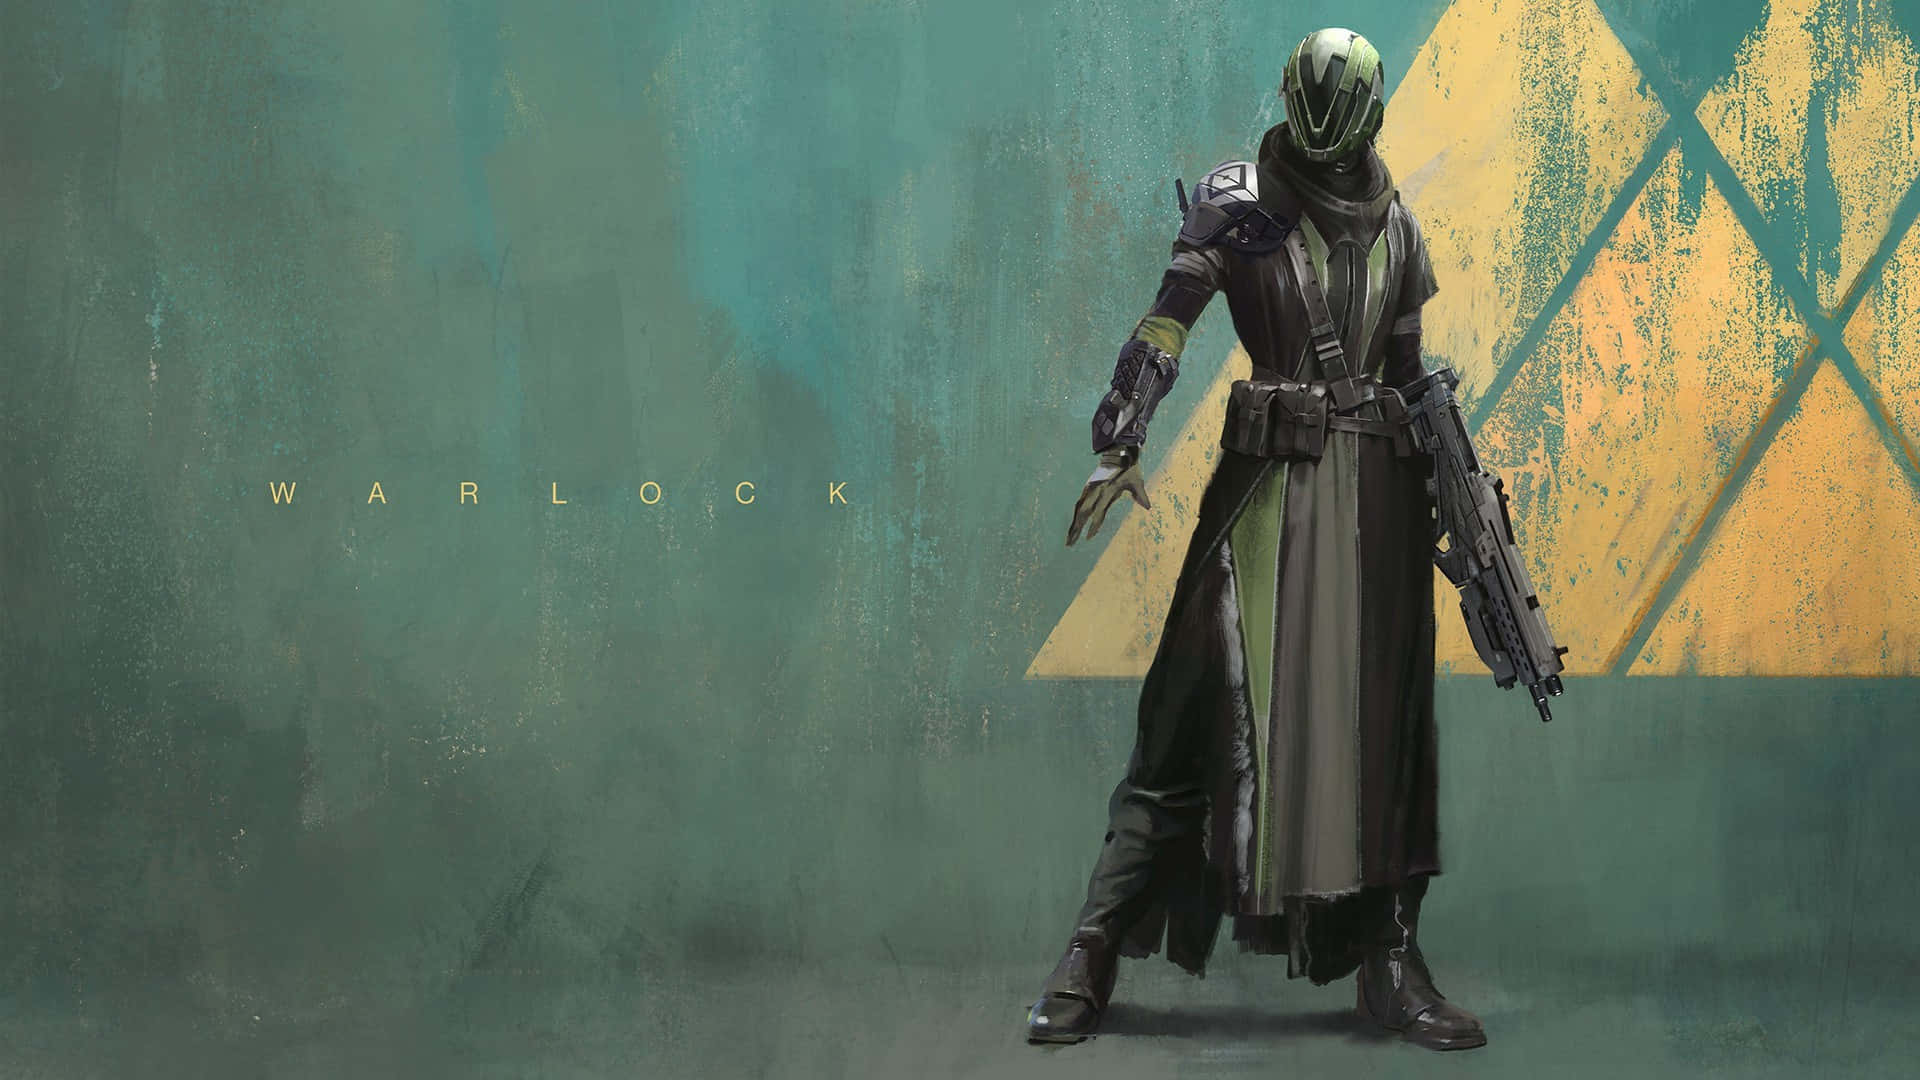 A Warlock from Destiny 2, ready for action. Wallpaper